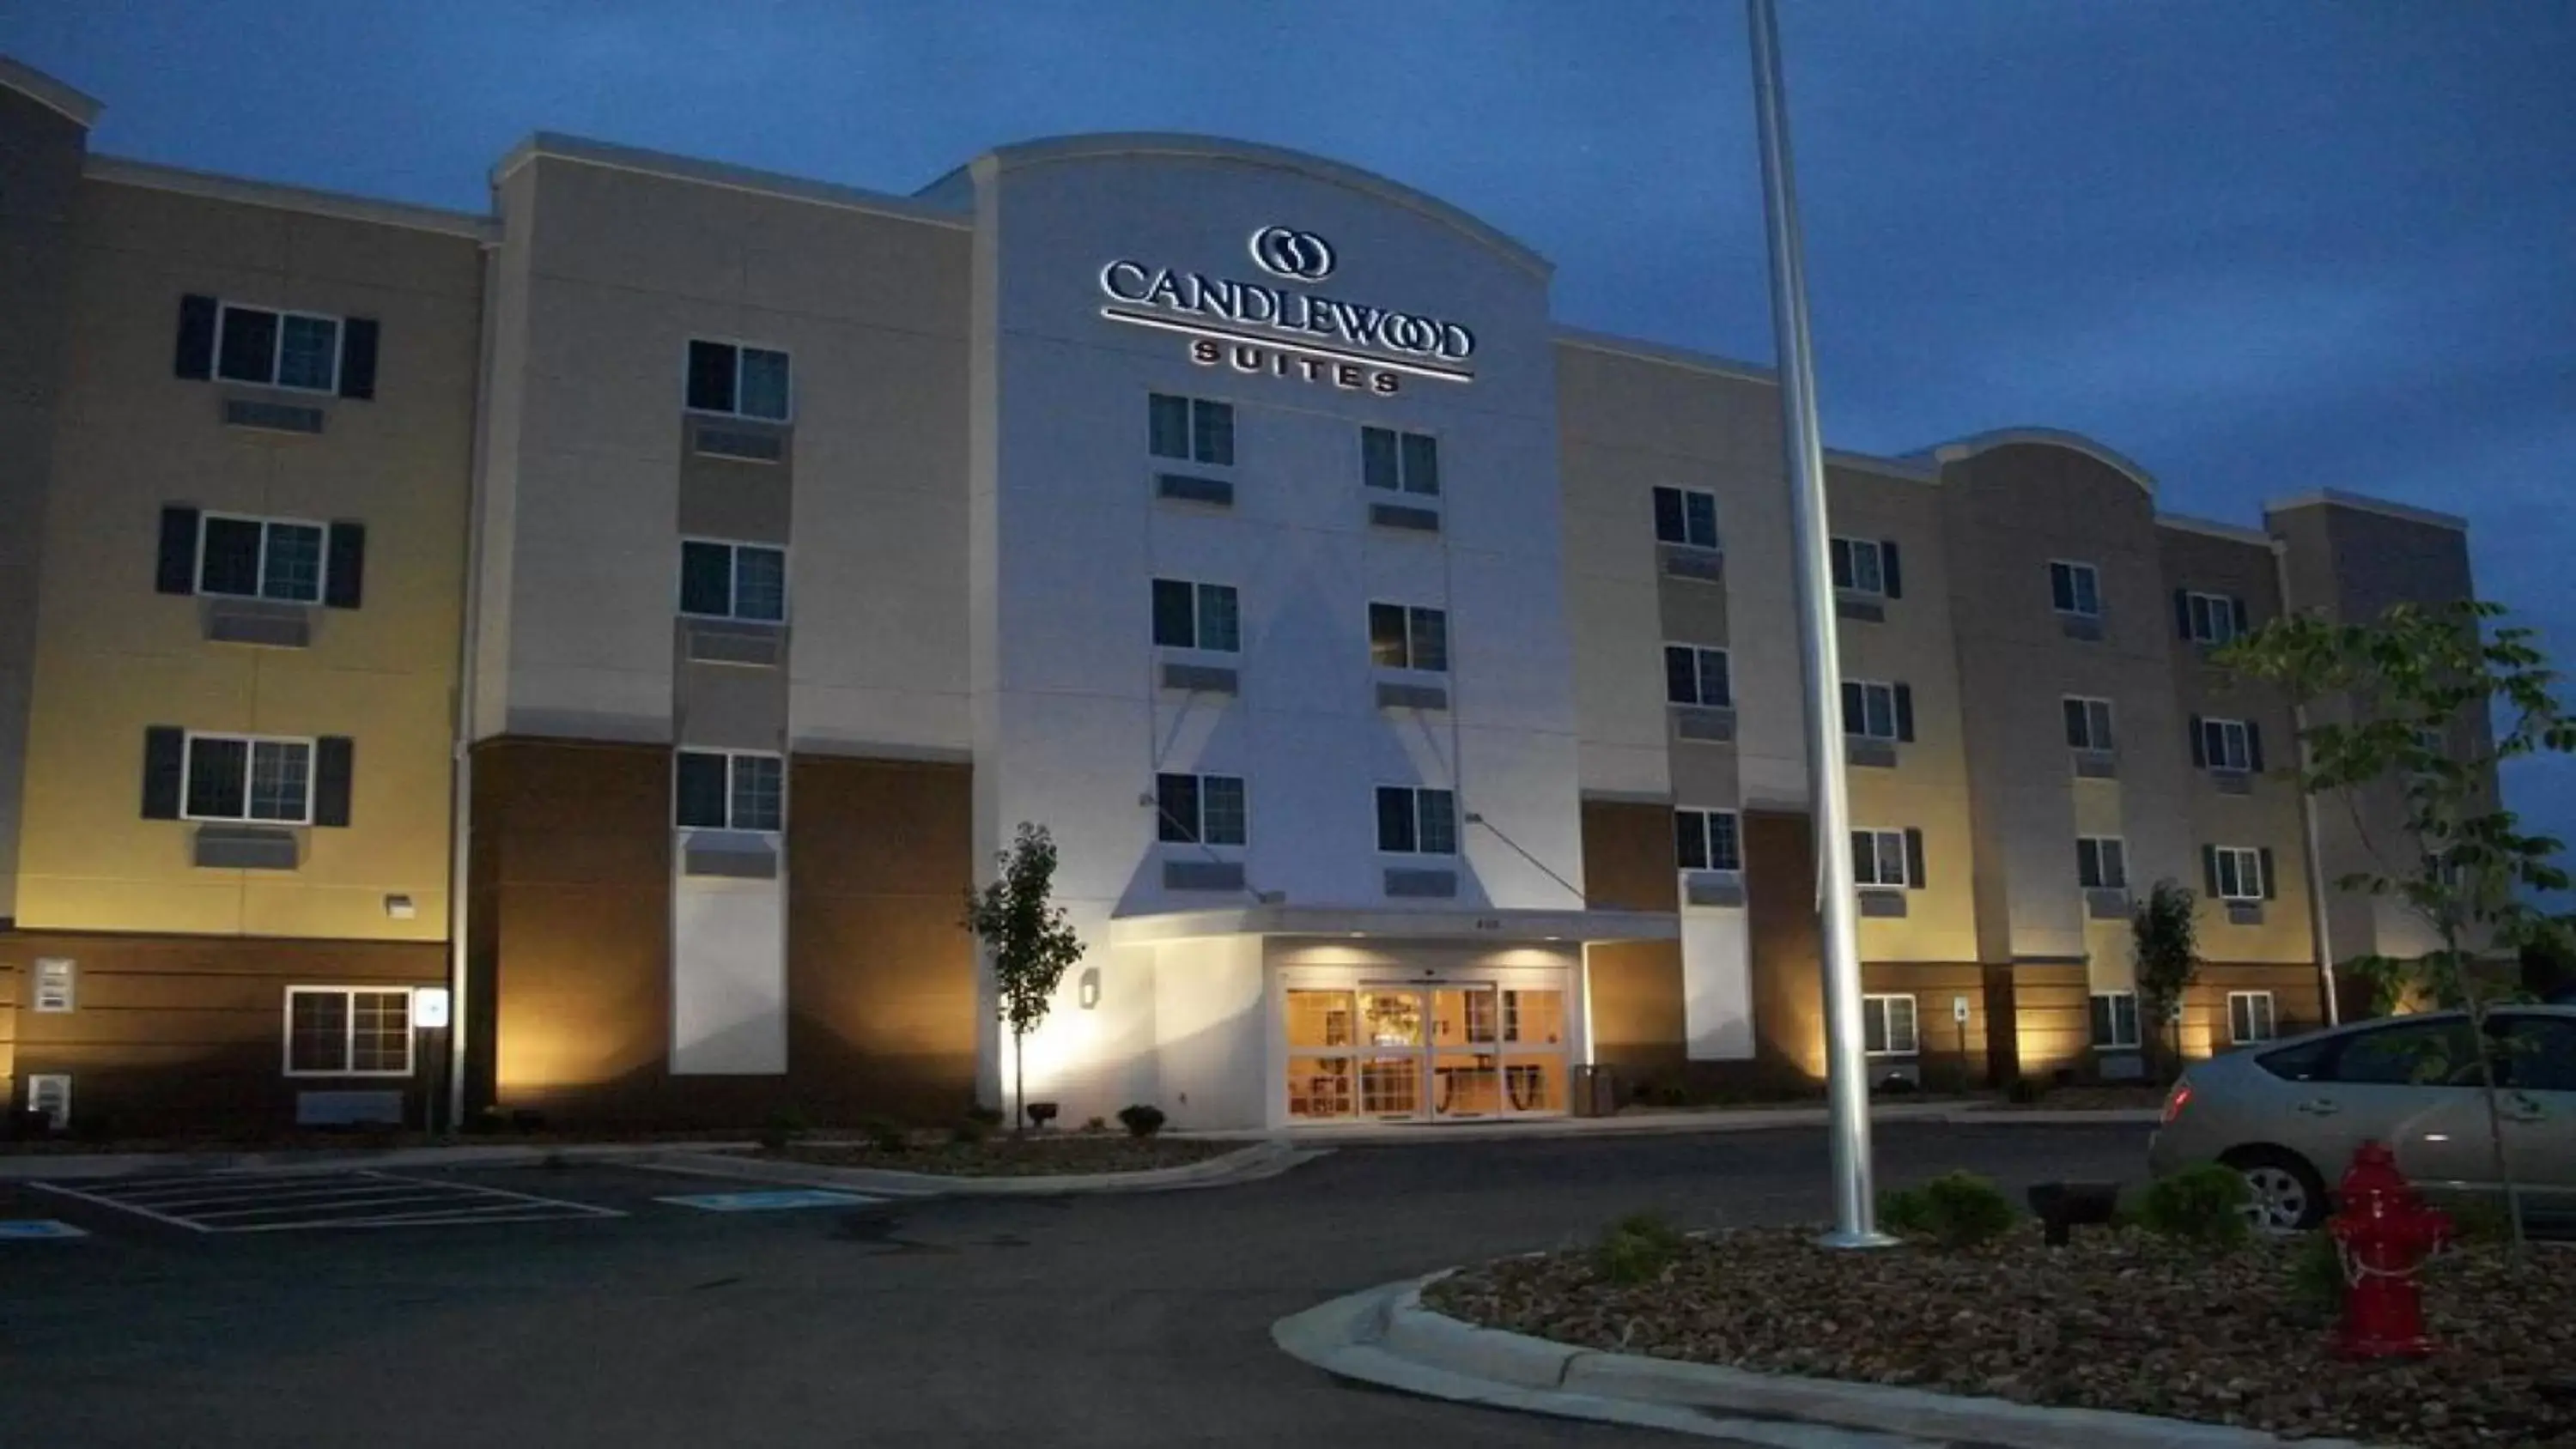 Property Building in Candlewood Suites Midland, an IHG Hotel